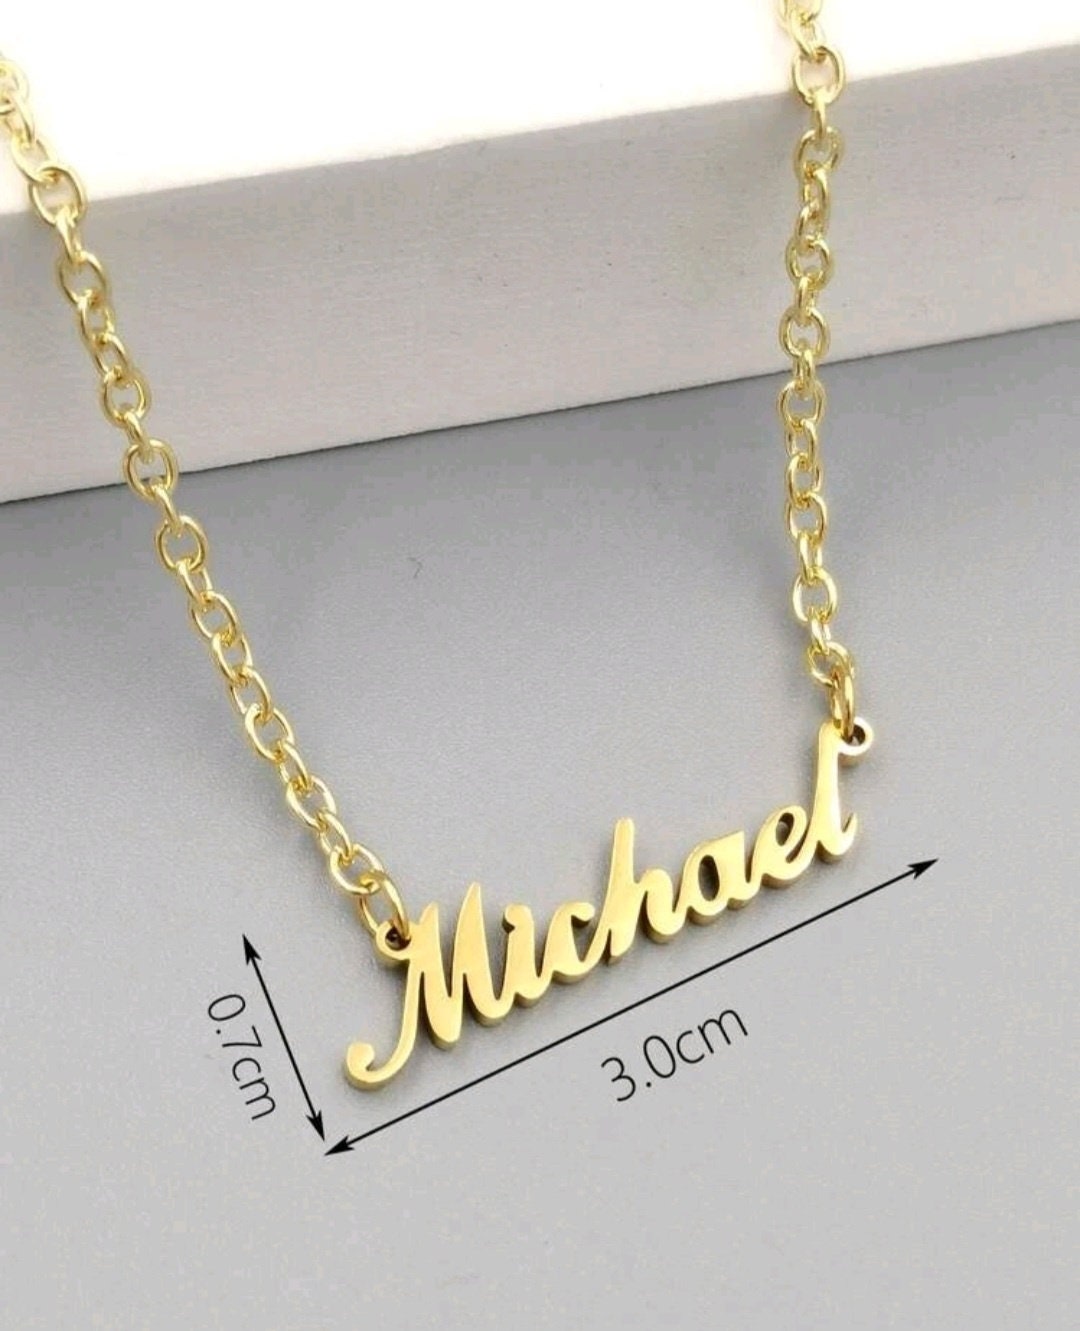 Dainty Name necklace Michael gold Stainless steel pendant necklace gift for her